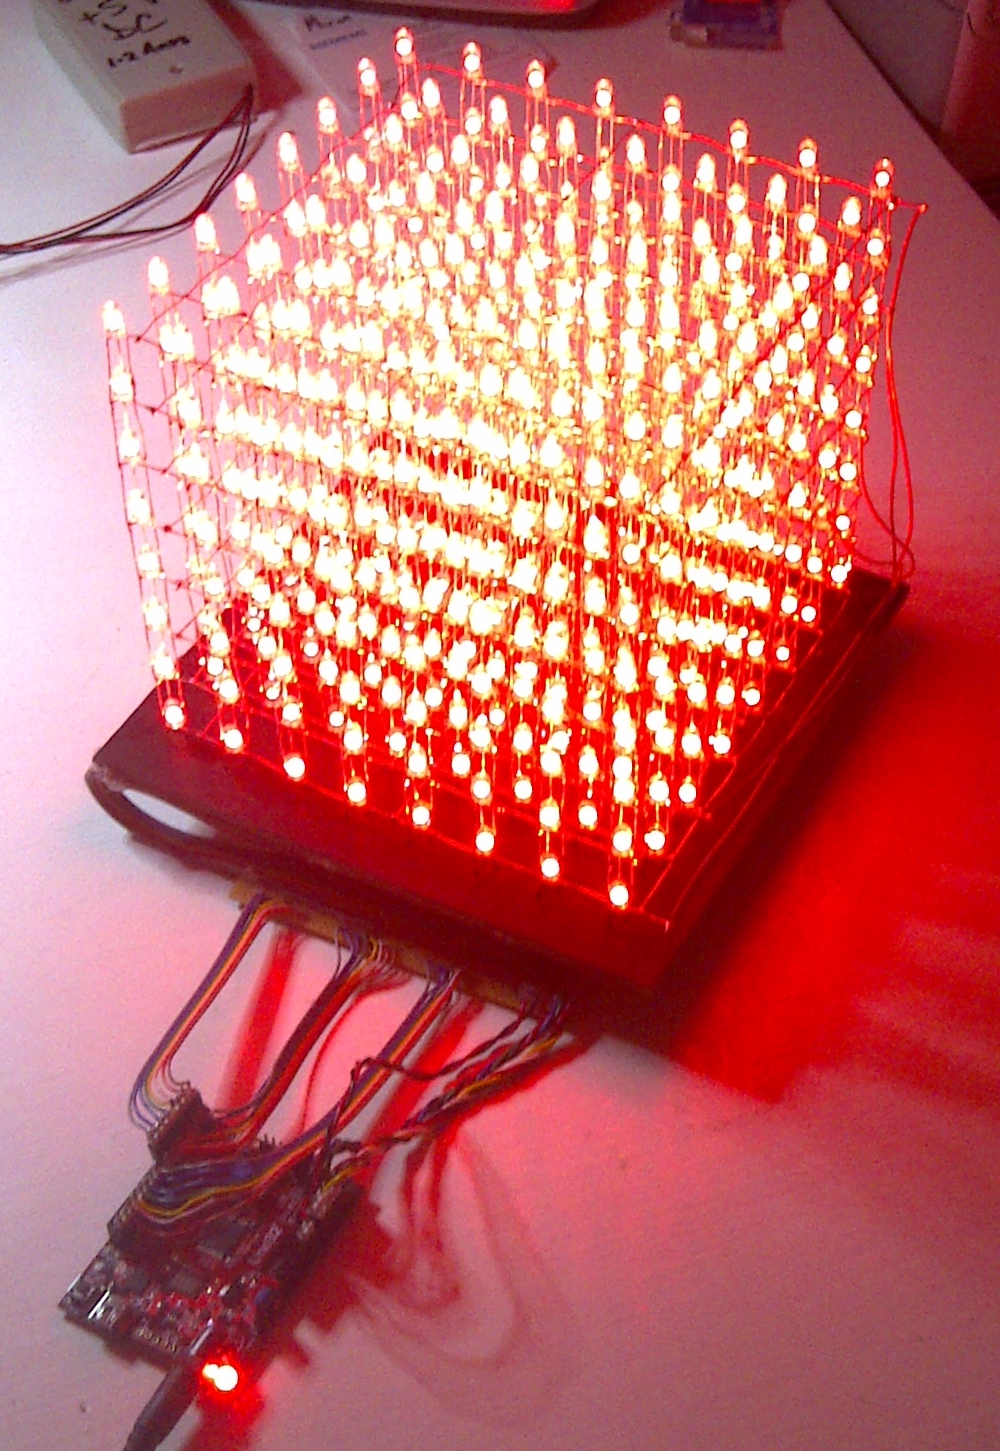 The RED part of all the LEDs on